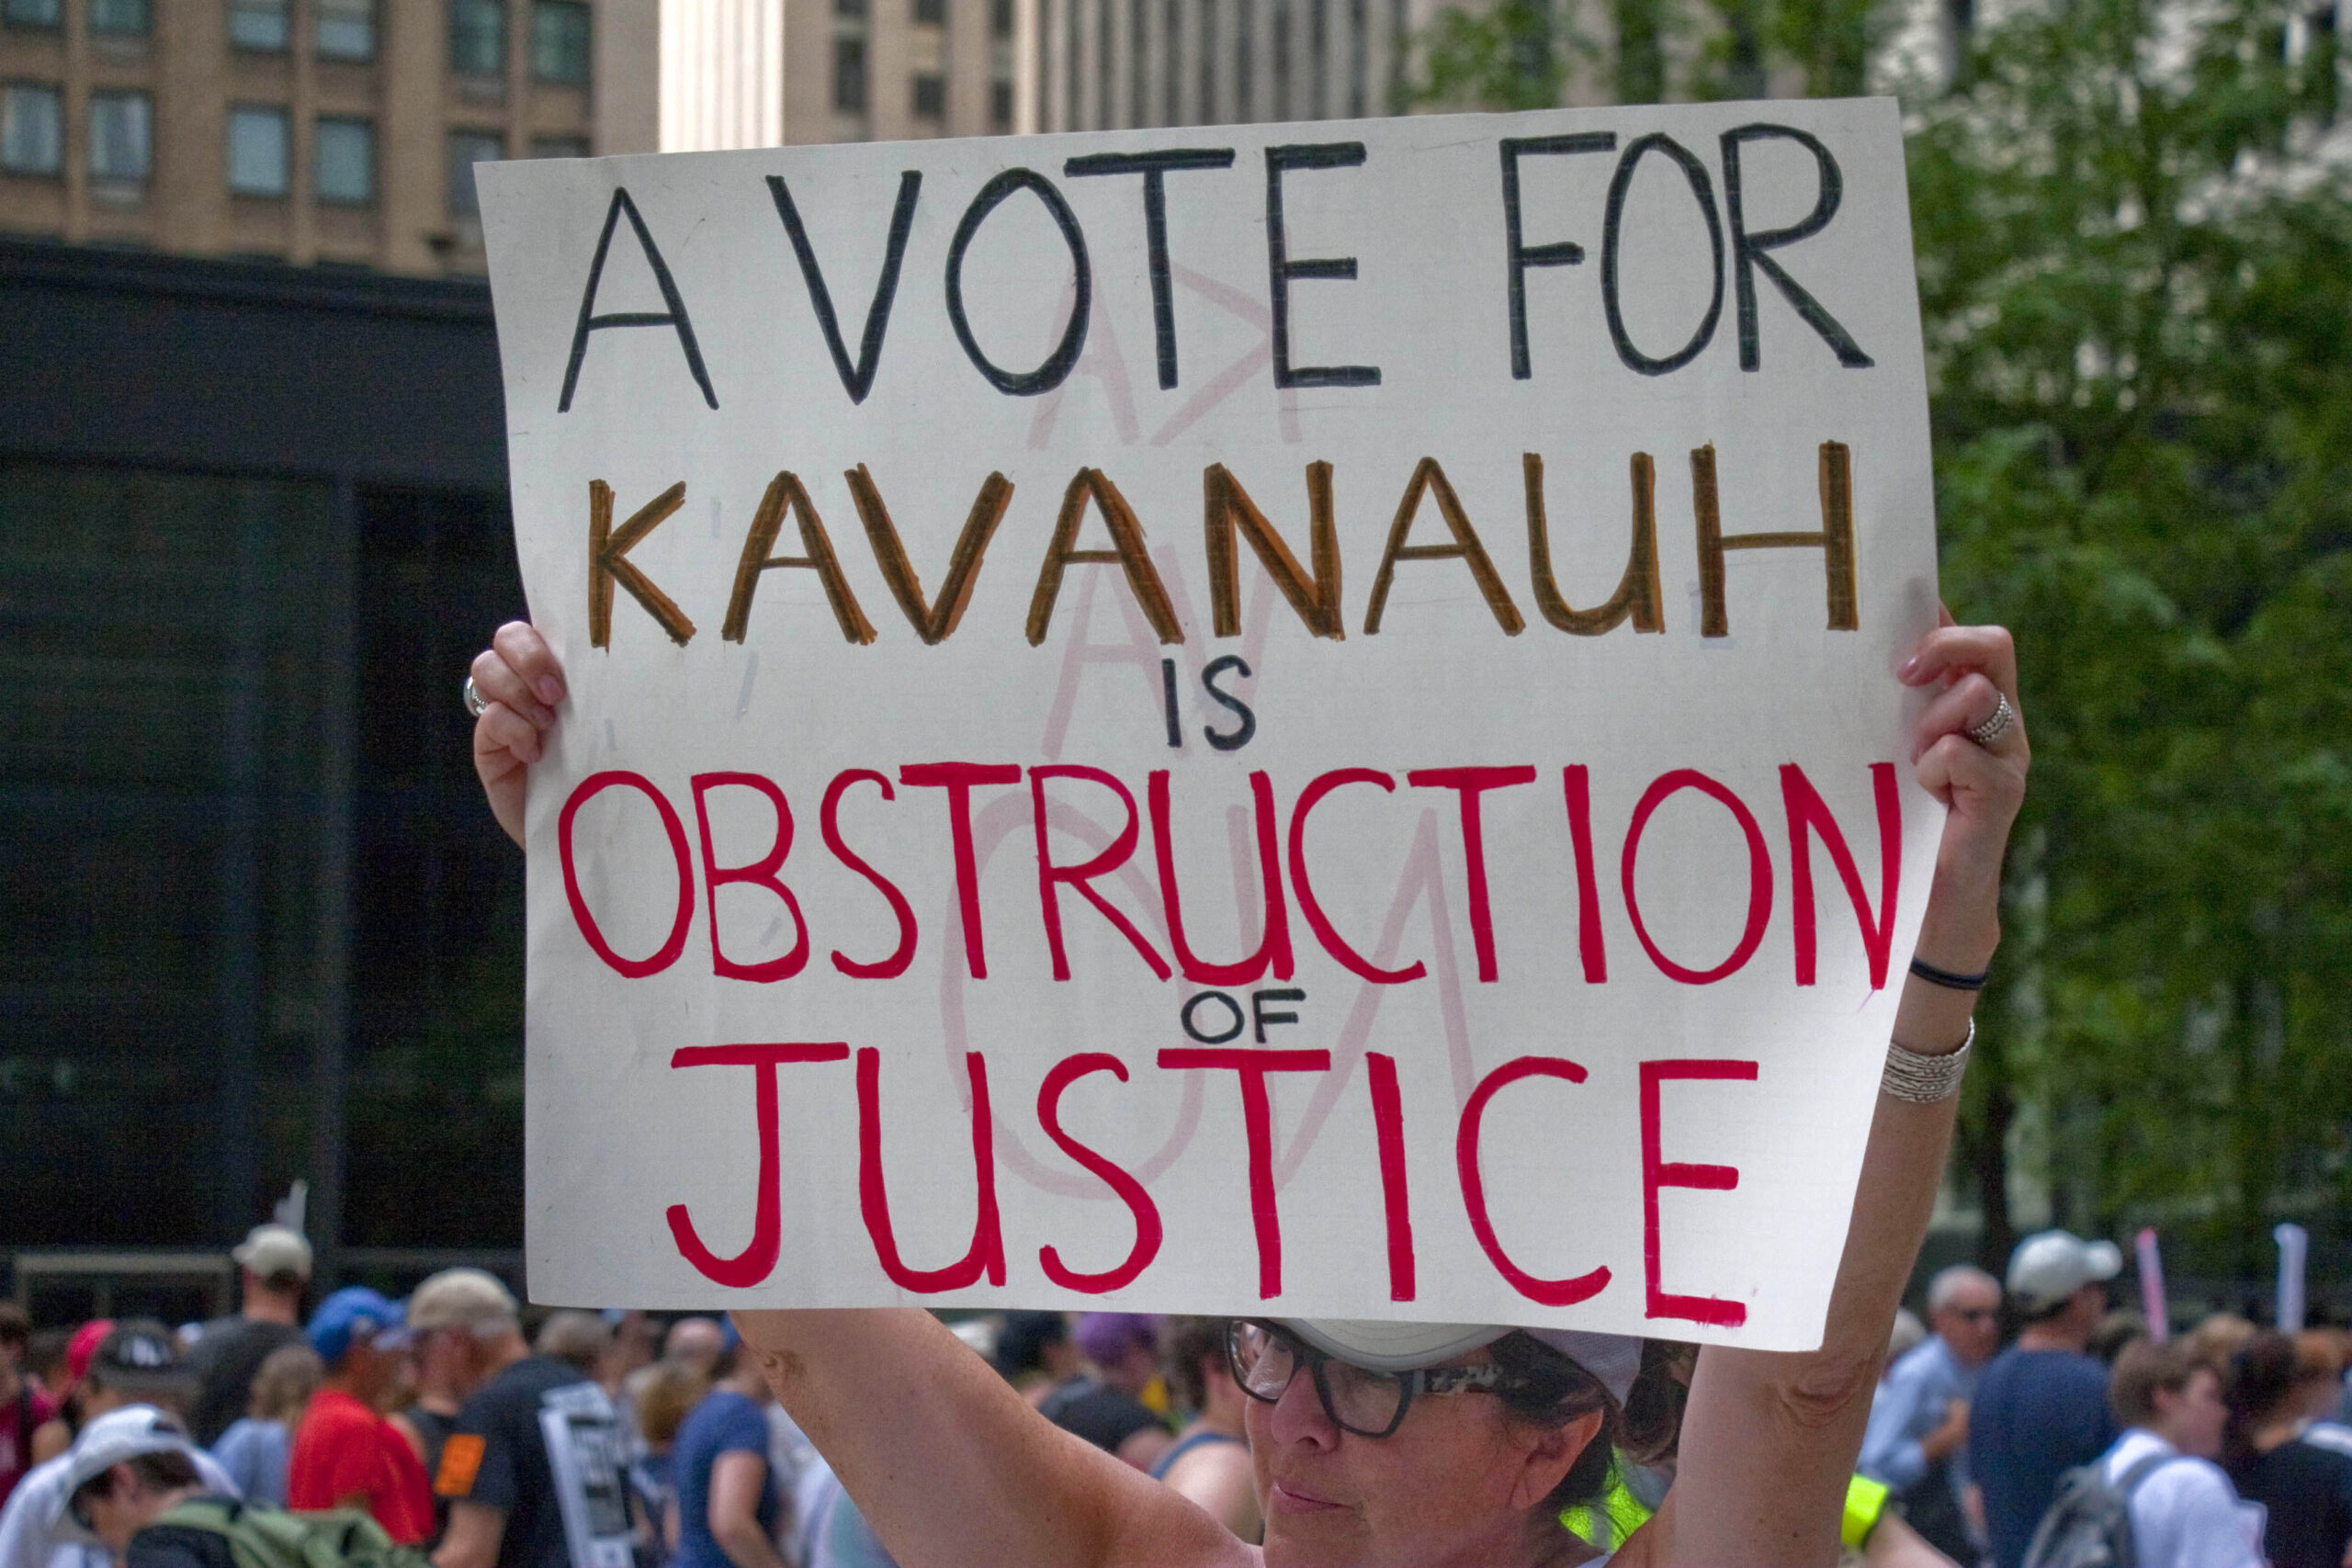 A vote for Kavanaugh is obstruction of justice